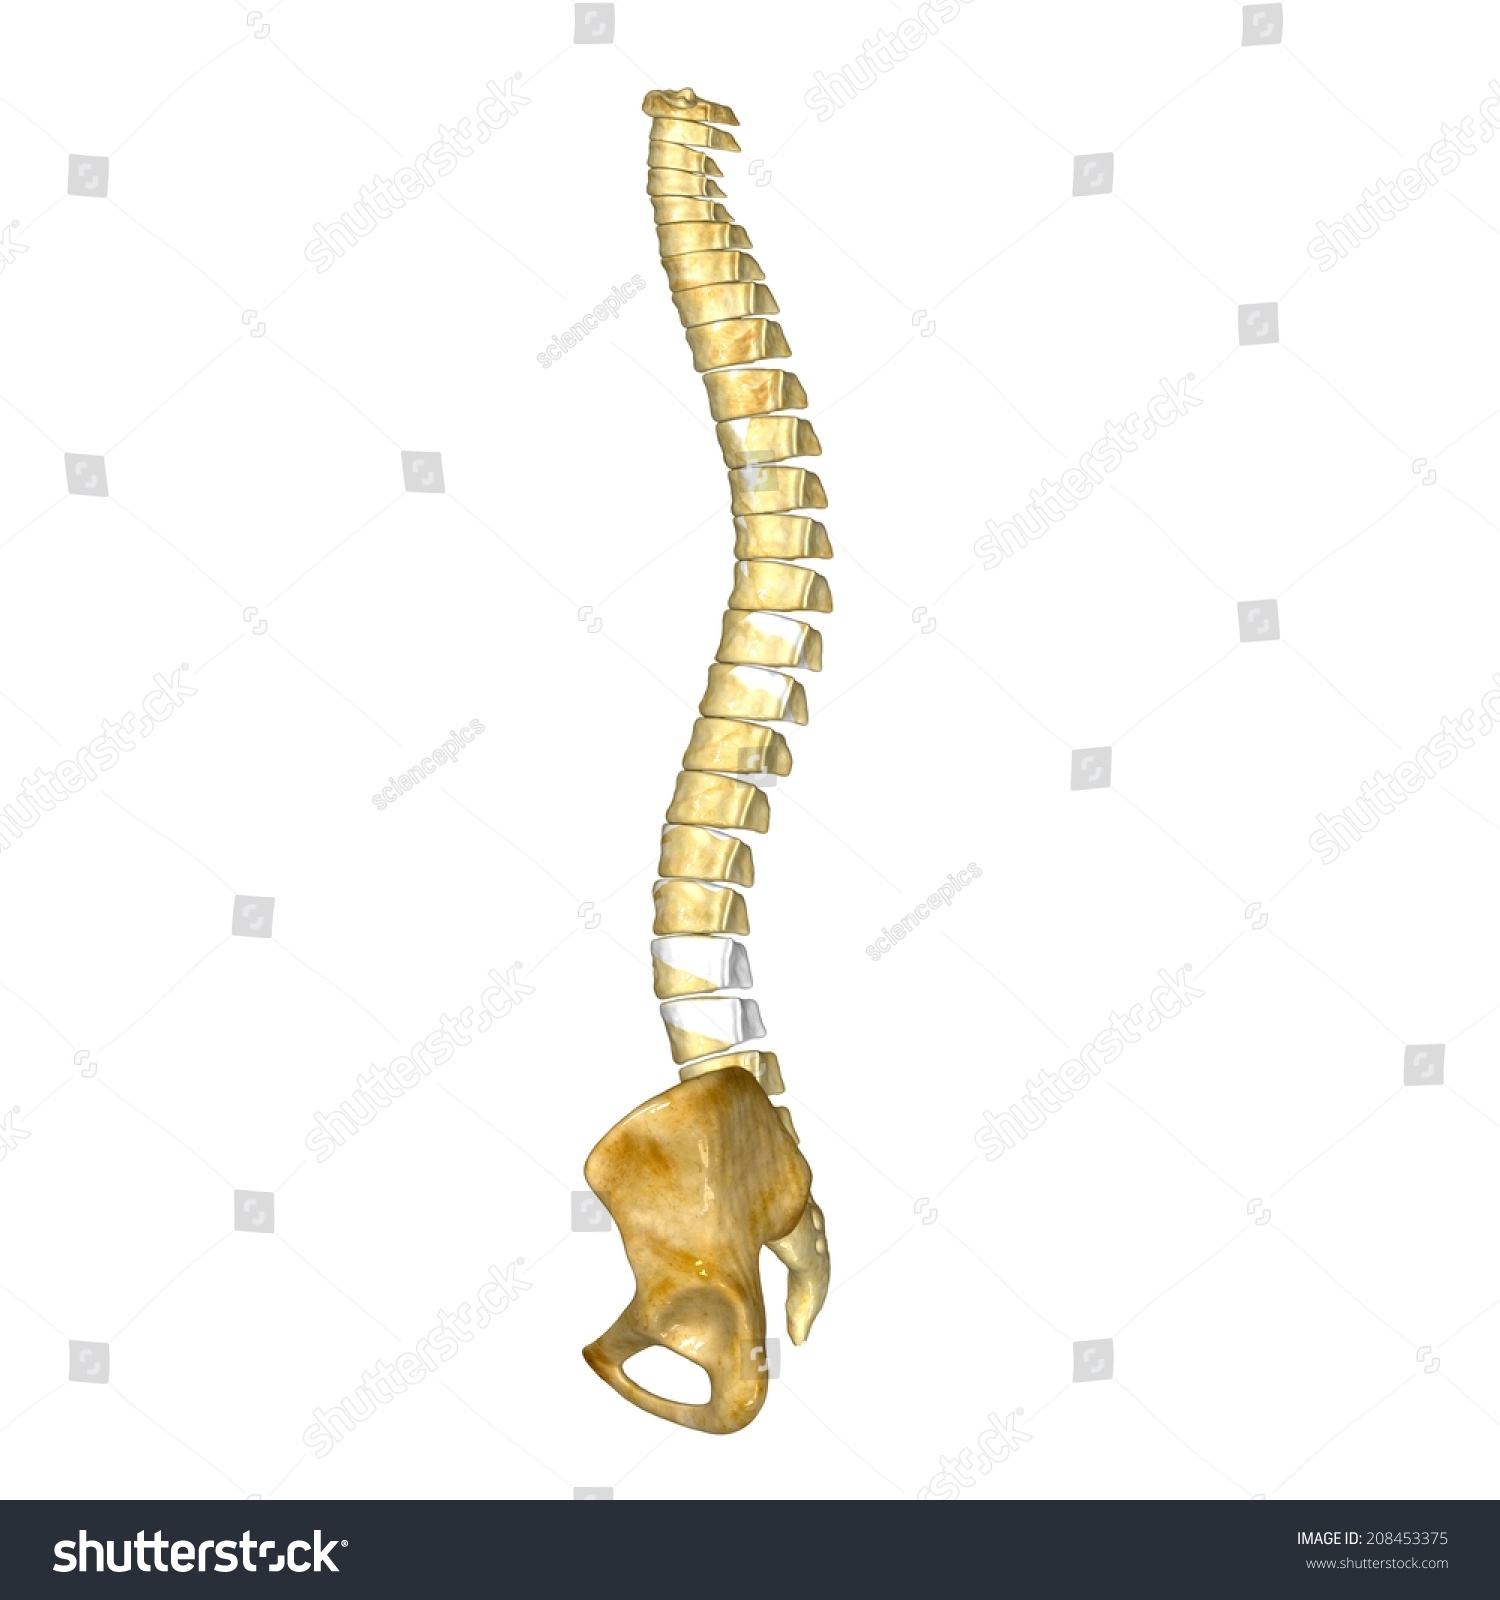 Hip With Back Bone Stock Photo 208453375 : Shutterstock